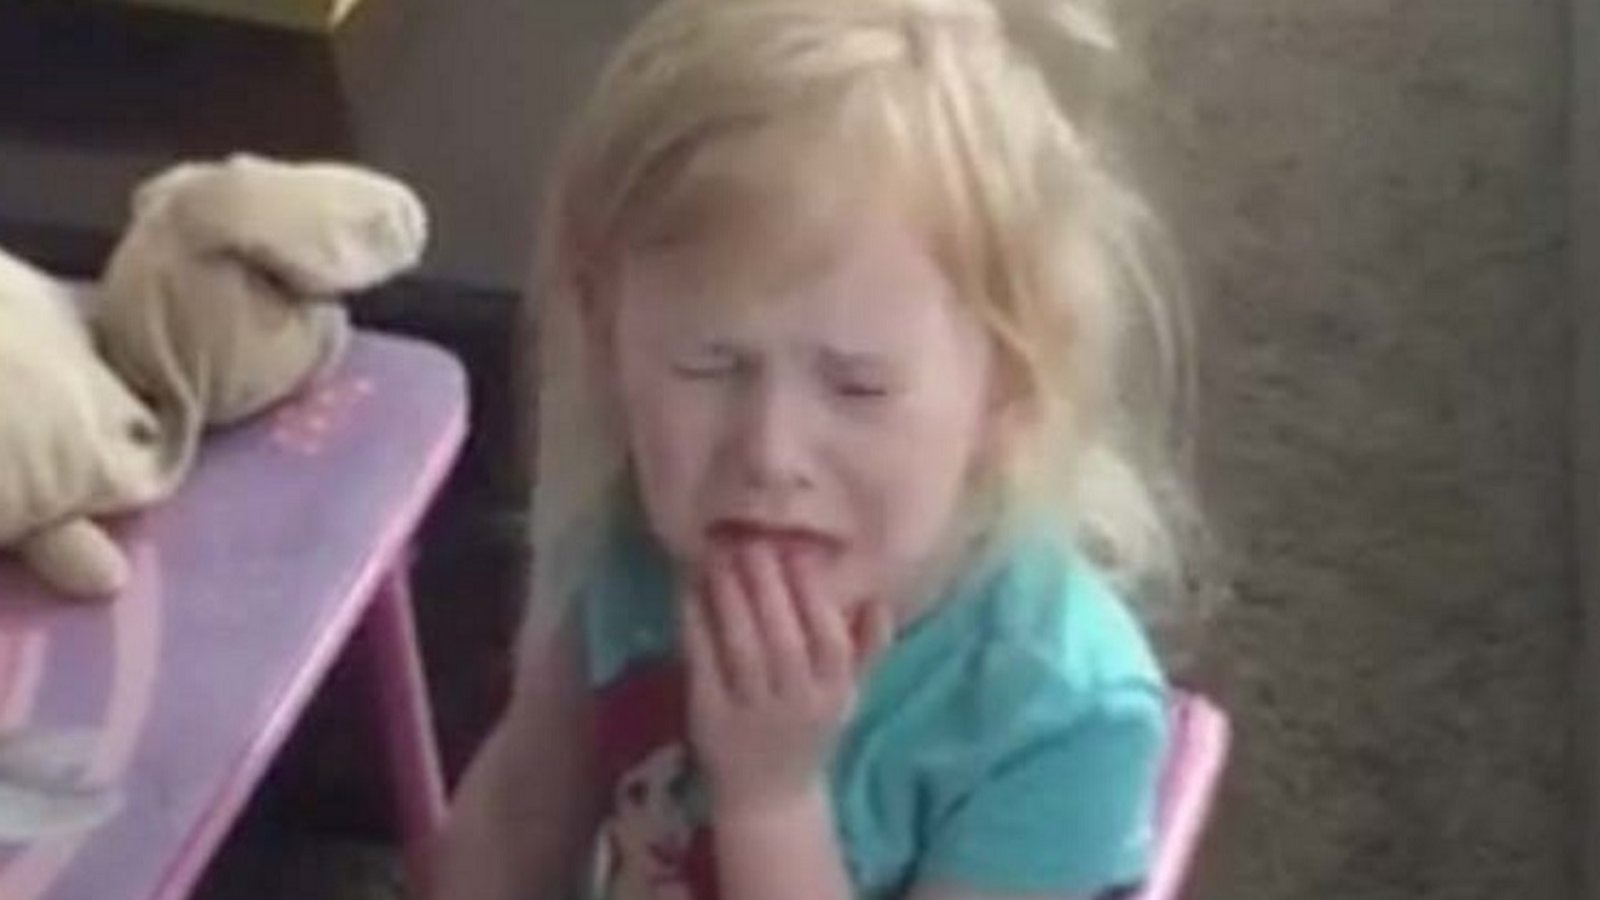 Four-year-old girl in tears after her favorite player is traded before the deadline.